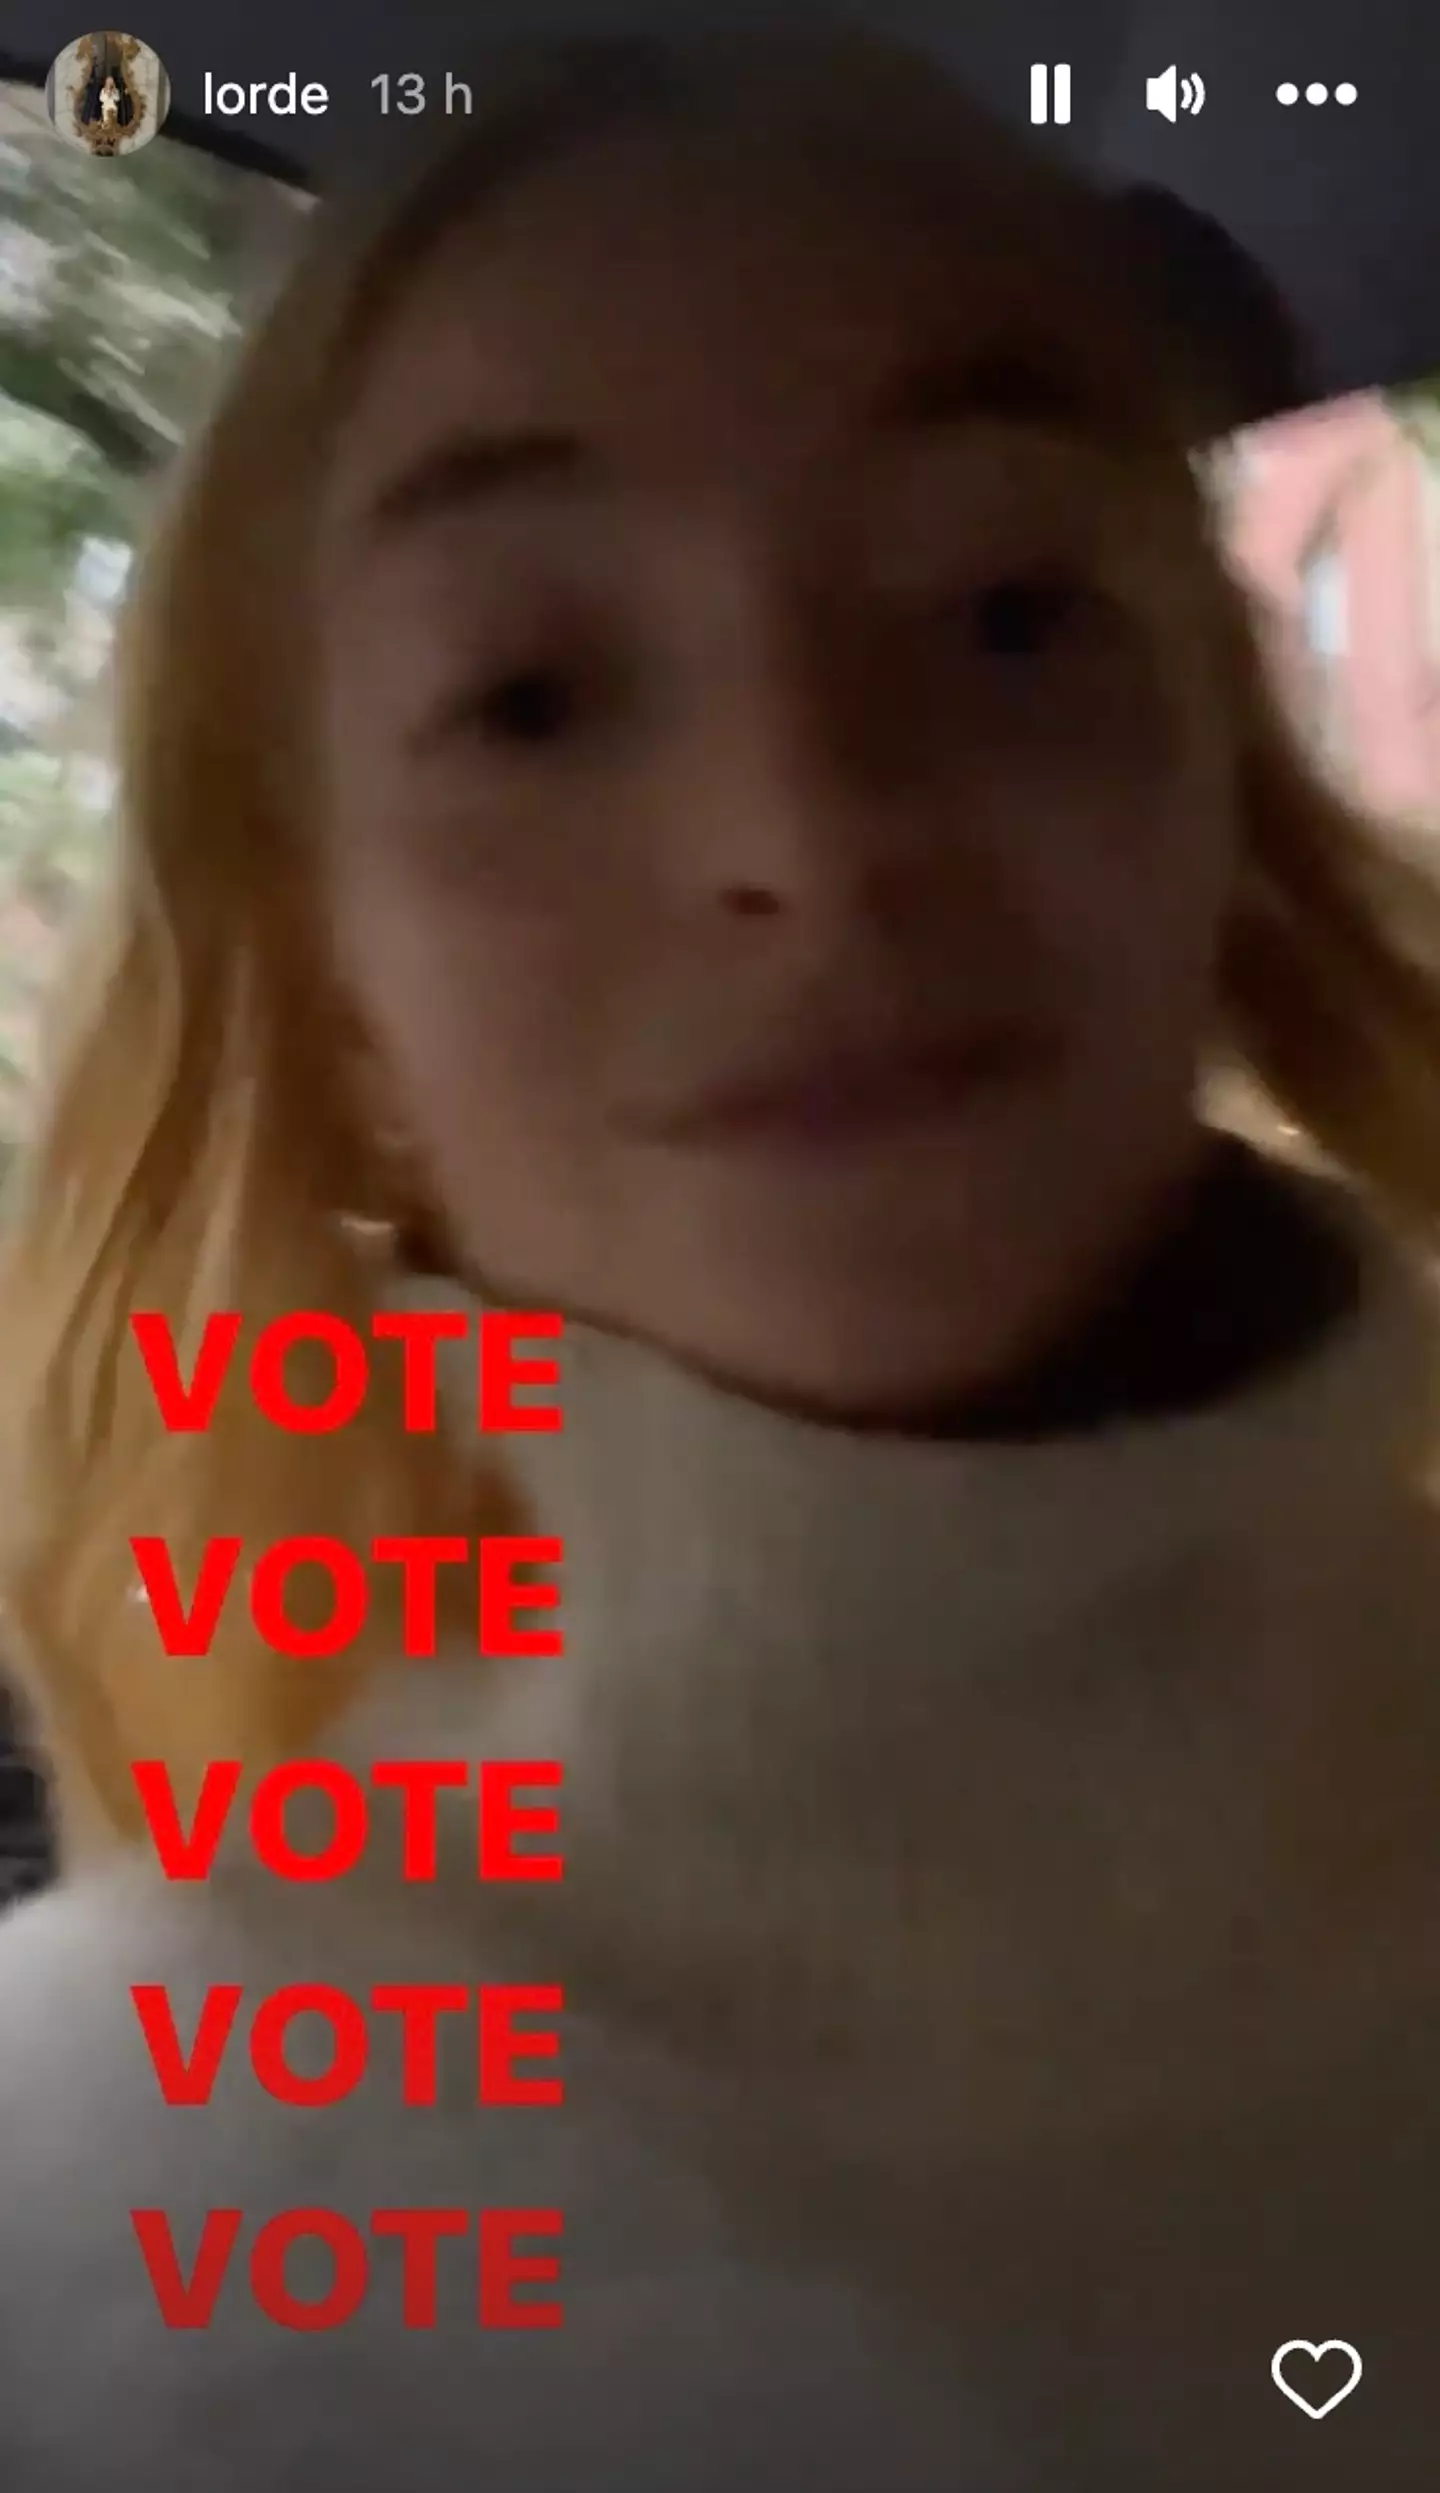 Lorde previously shared a post encouraging her fans in the city to vote on the mayoral ballot.